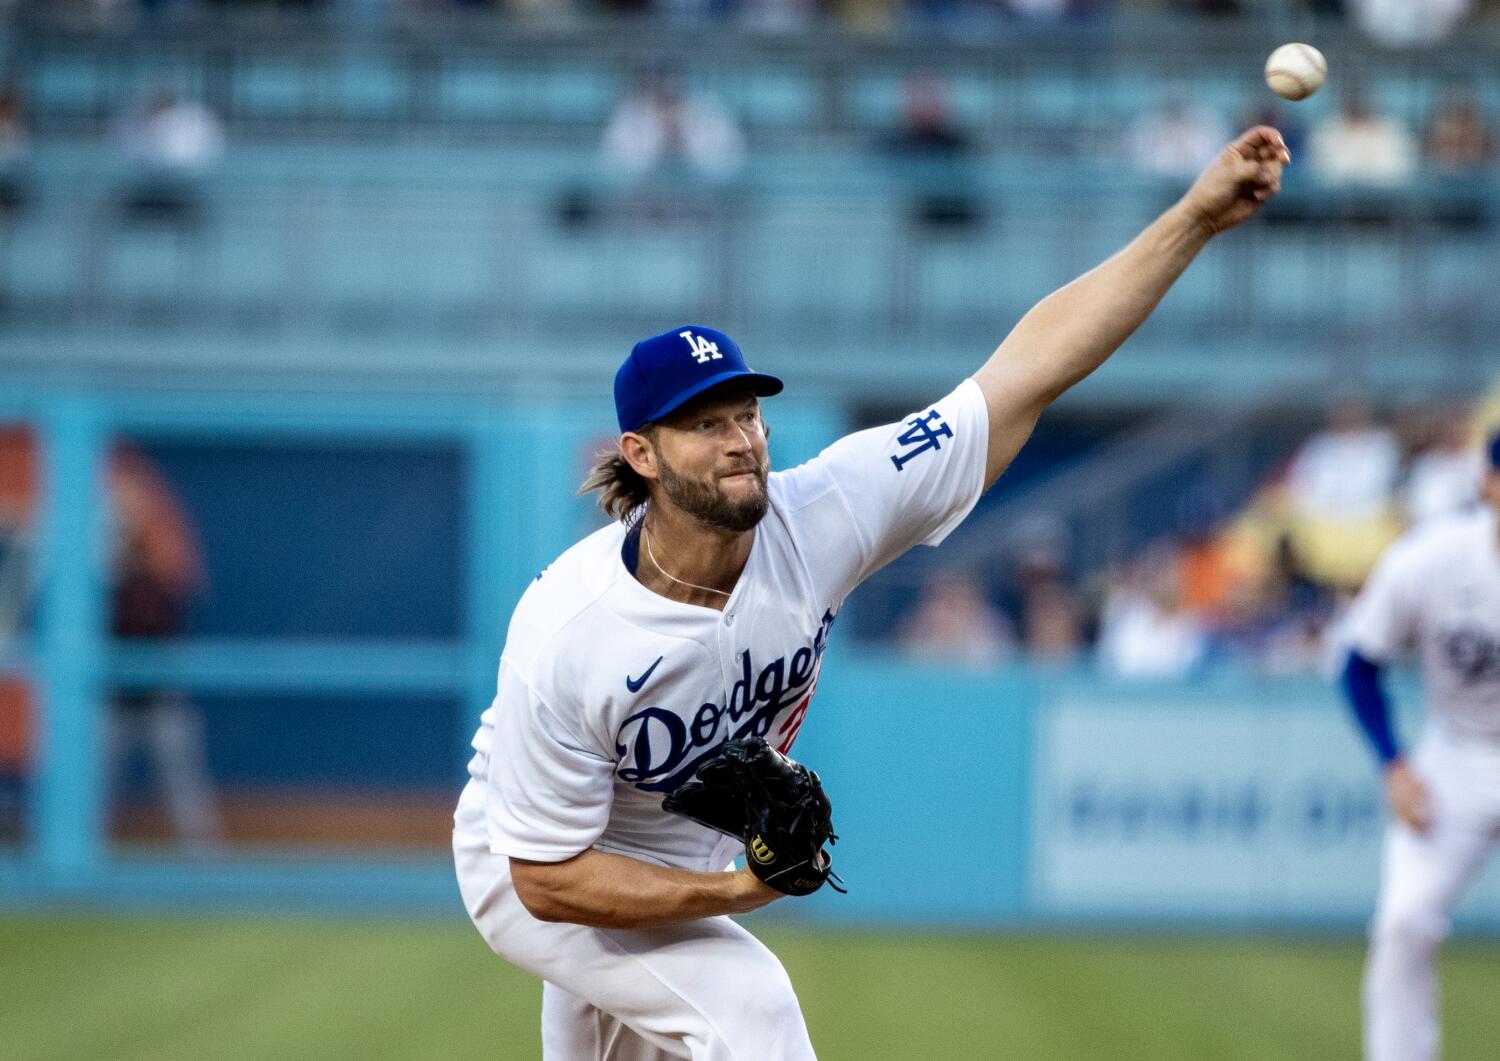 Plaschke: The Clayton Kershaw Crusade is making a stirring last stand